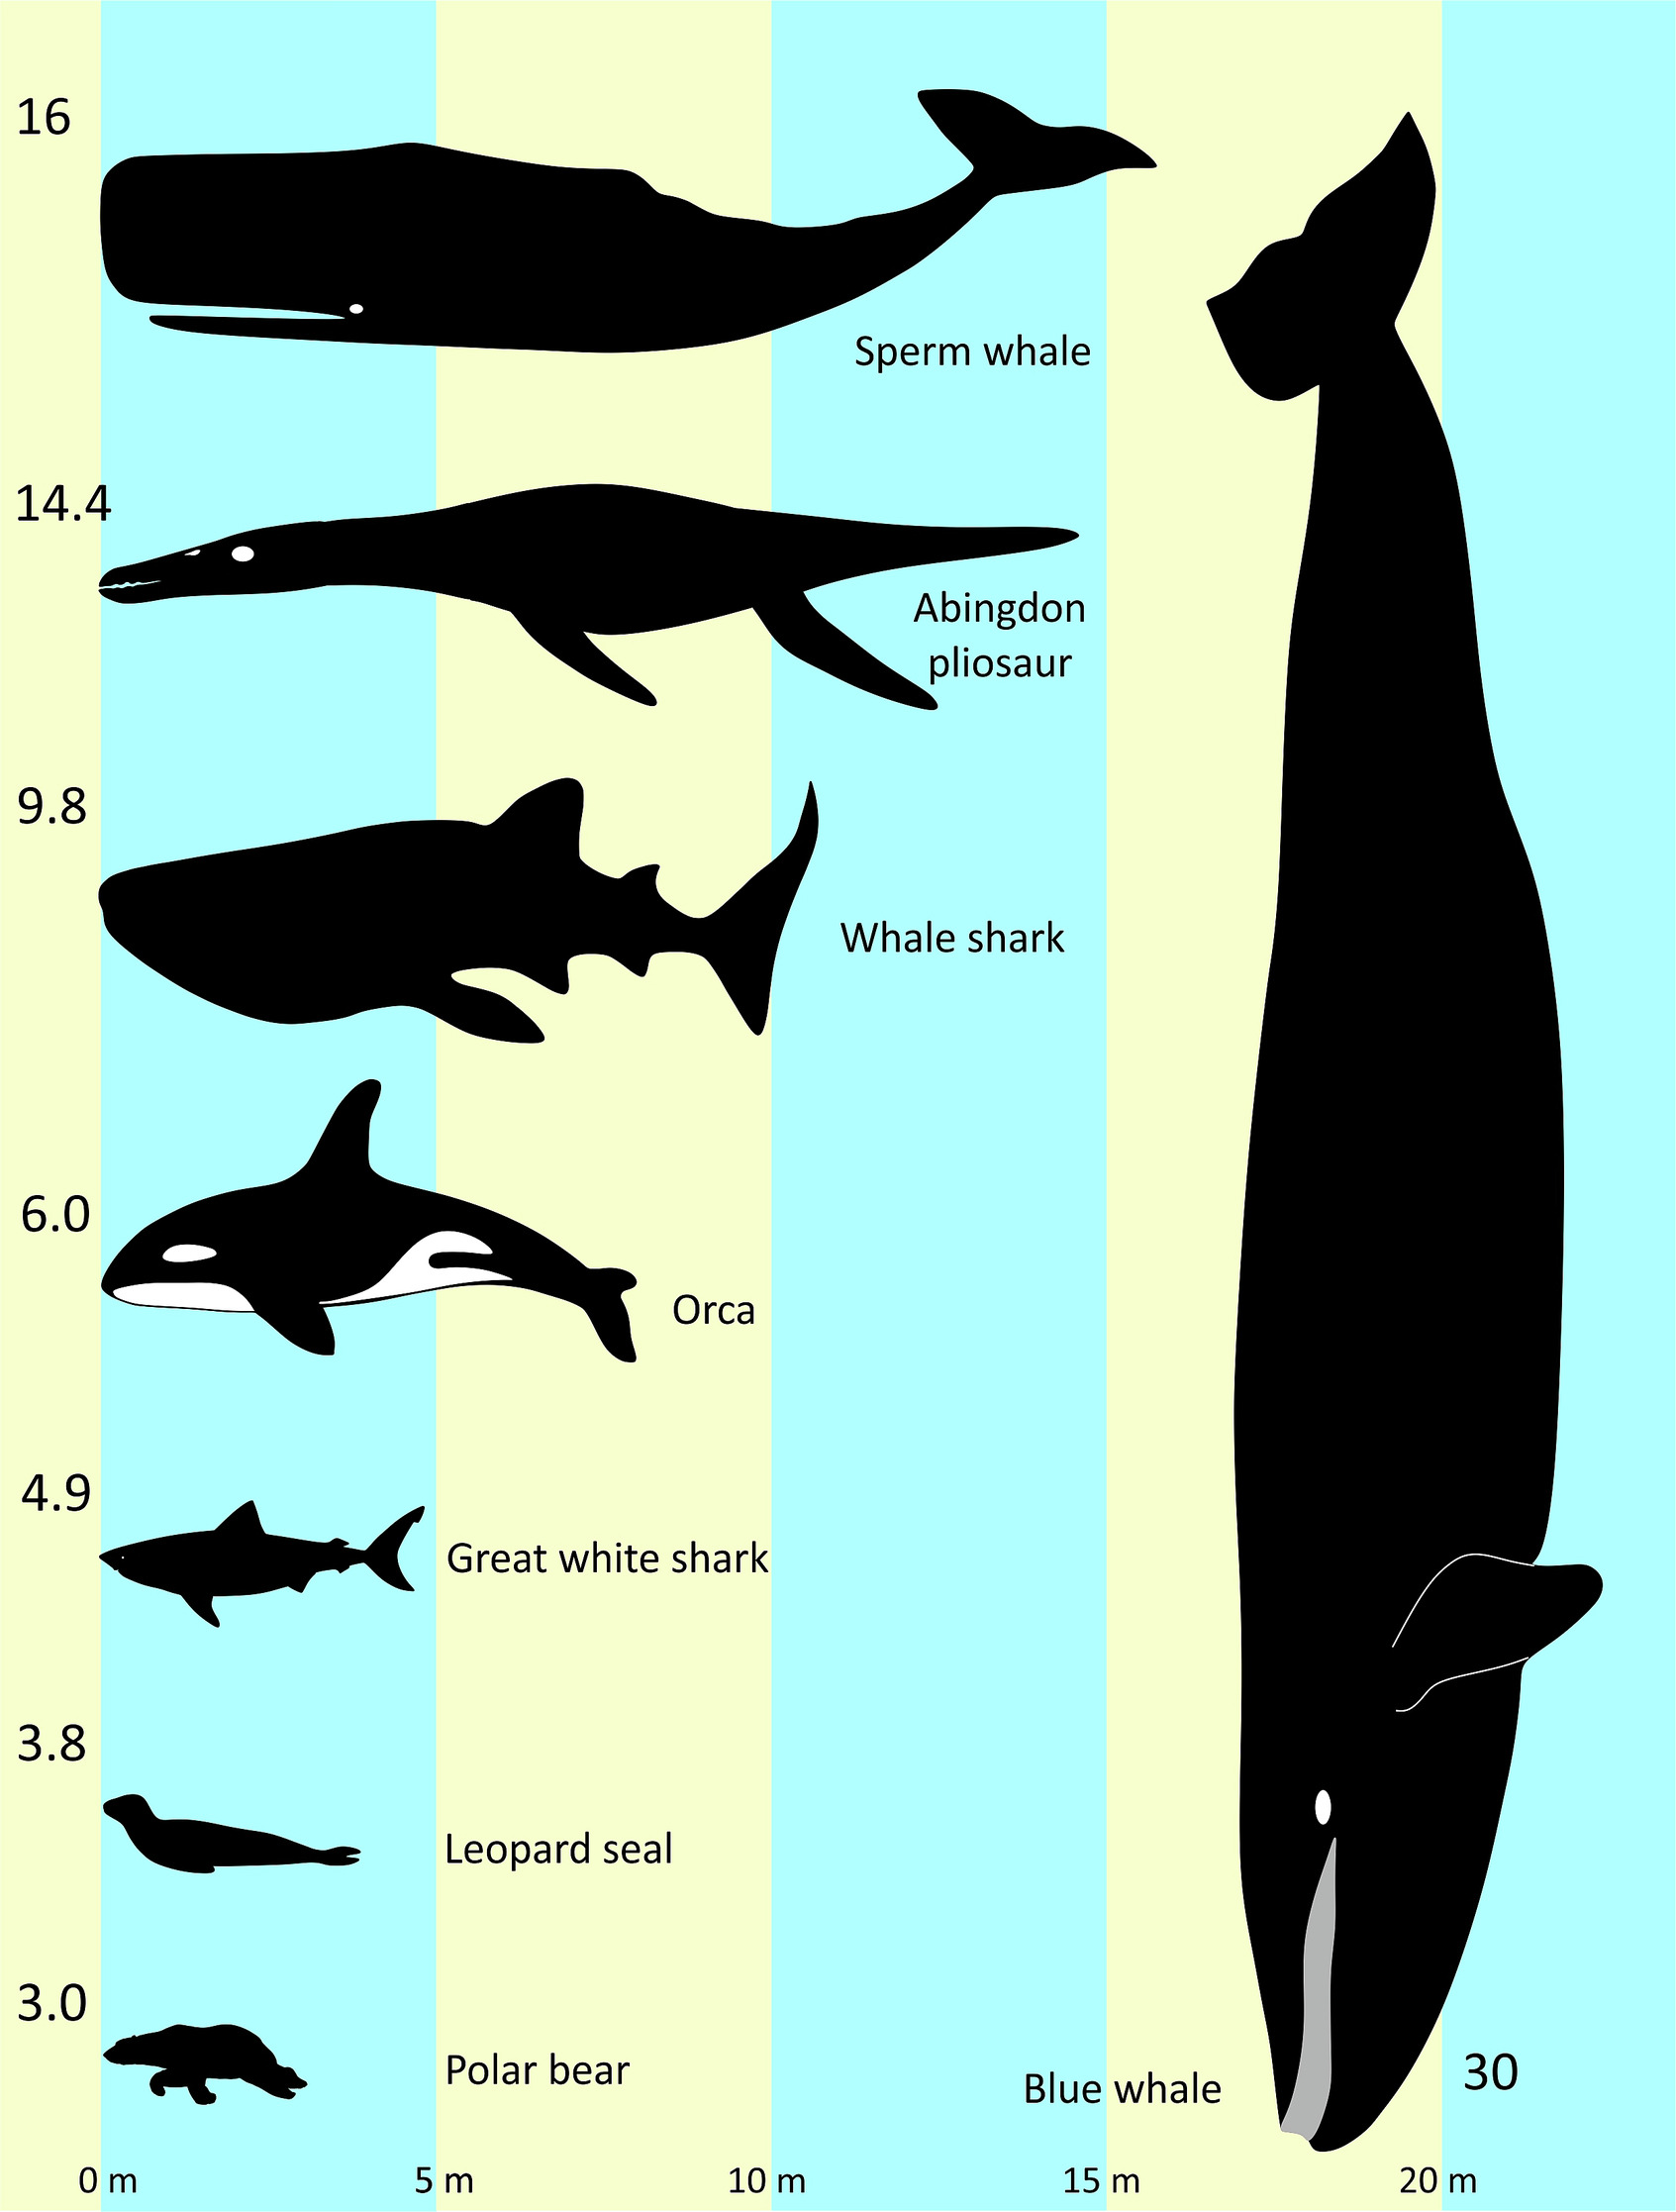 Diagram placing the Abingdon pliosaur in a ‘beauty contest’ with a range of recent aquatic and semi-aquatic vertebrates to show the overall body sizes.